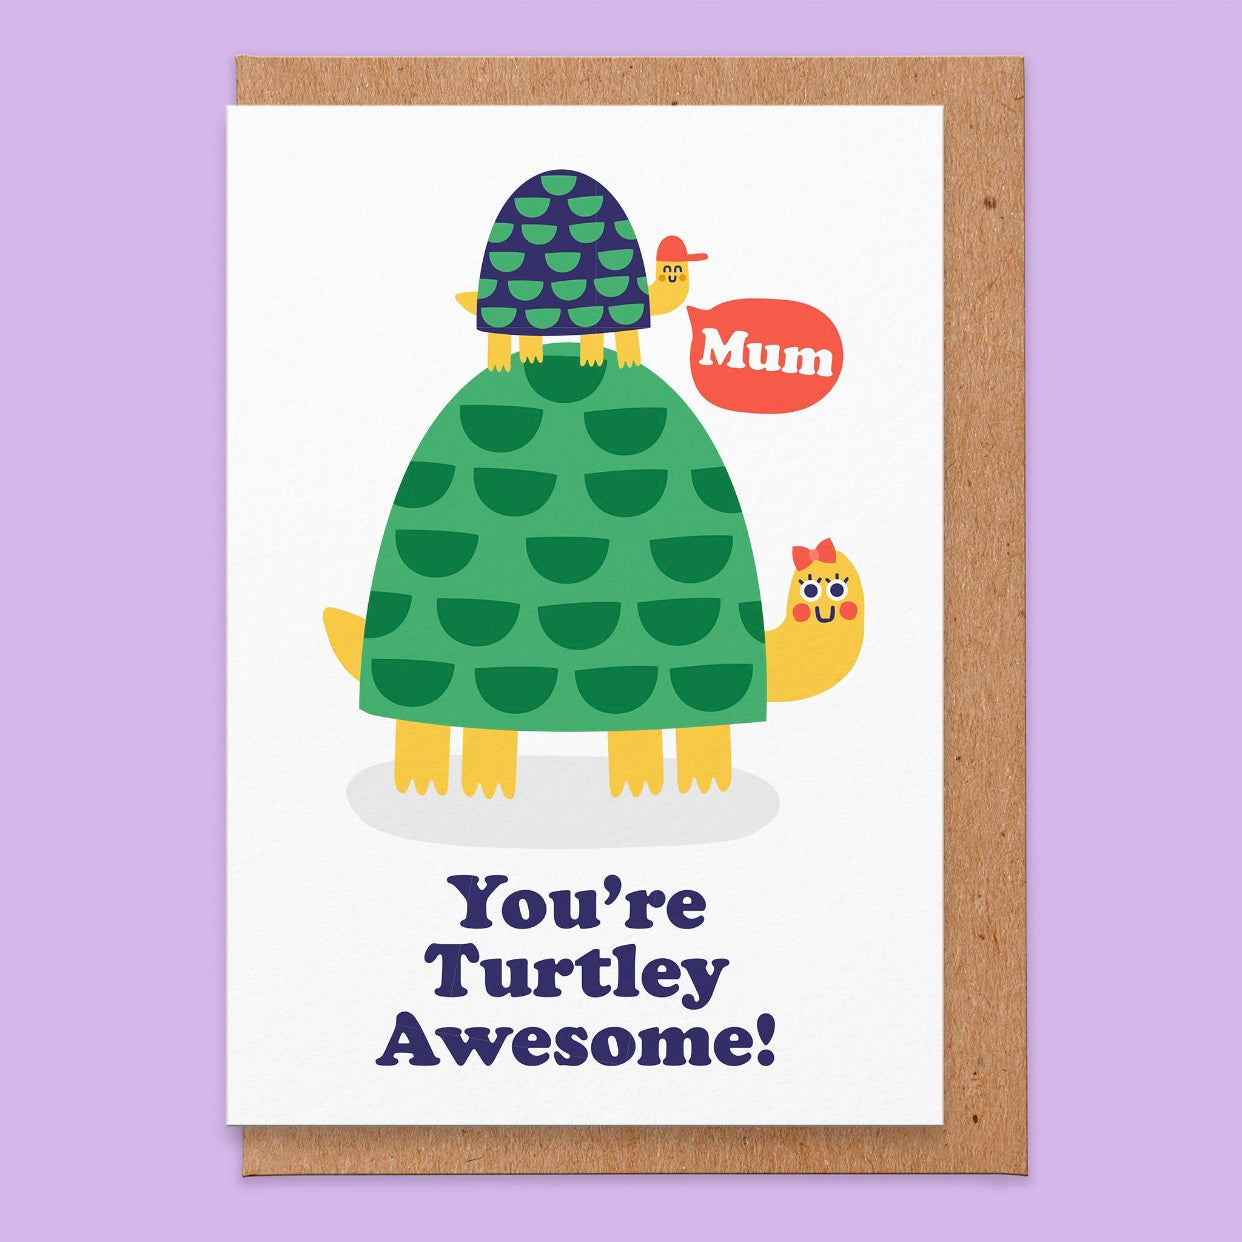 Mum You're turtley awesome greeting card